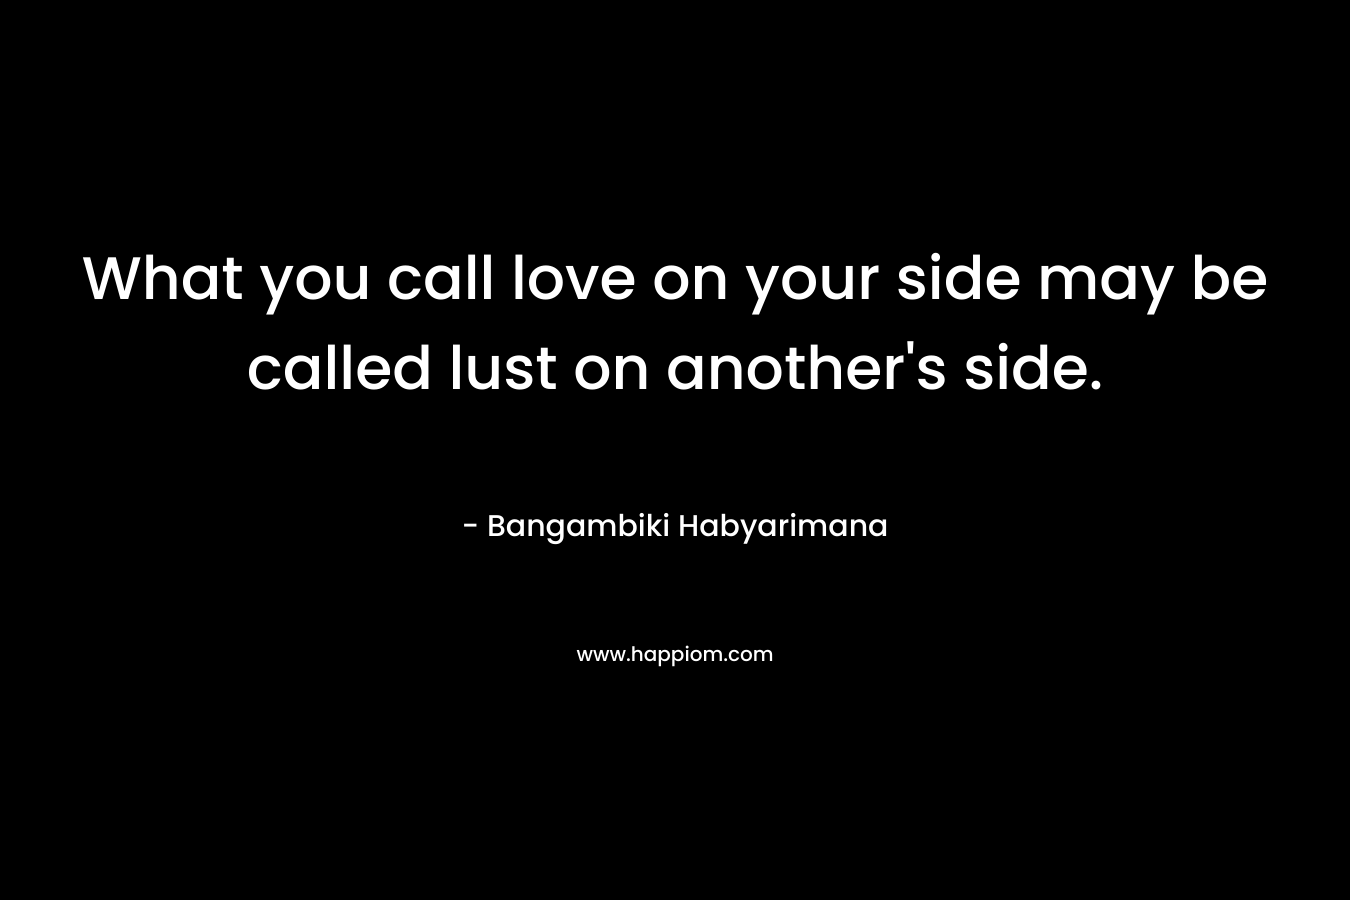 What you call love on your side may be called lust on another’s side. – Bangambiki Habyarimana